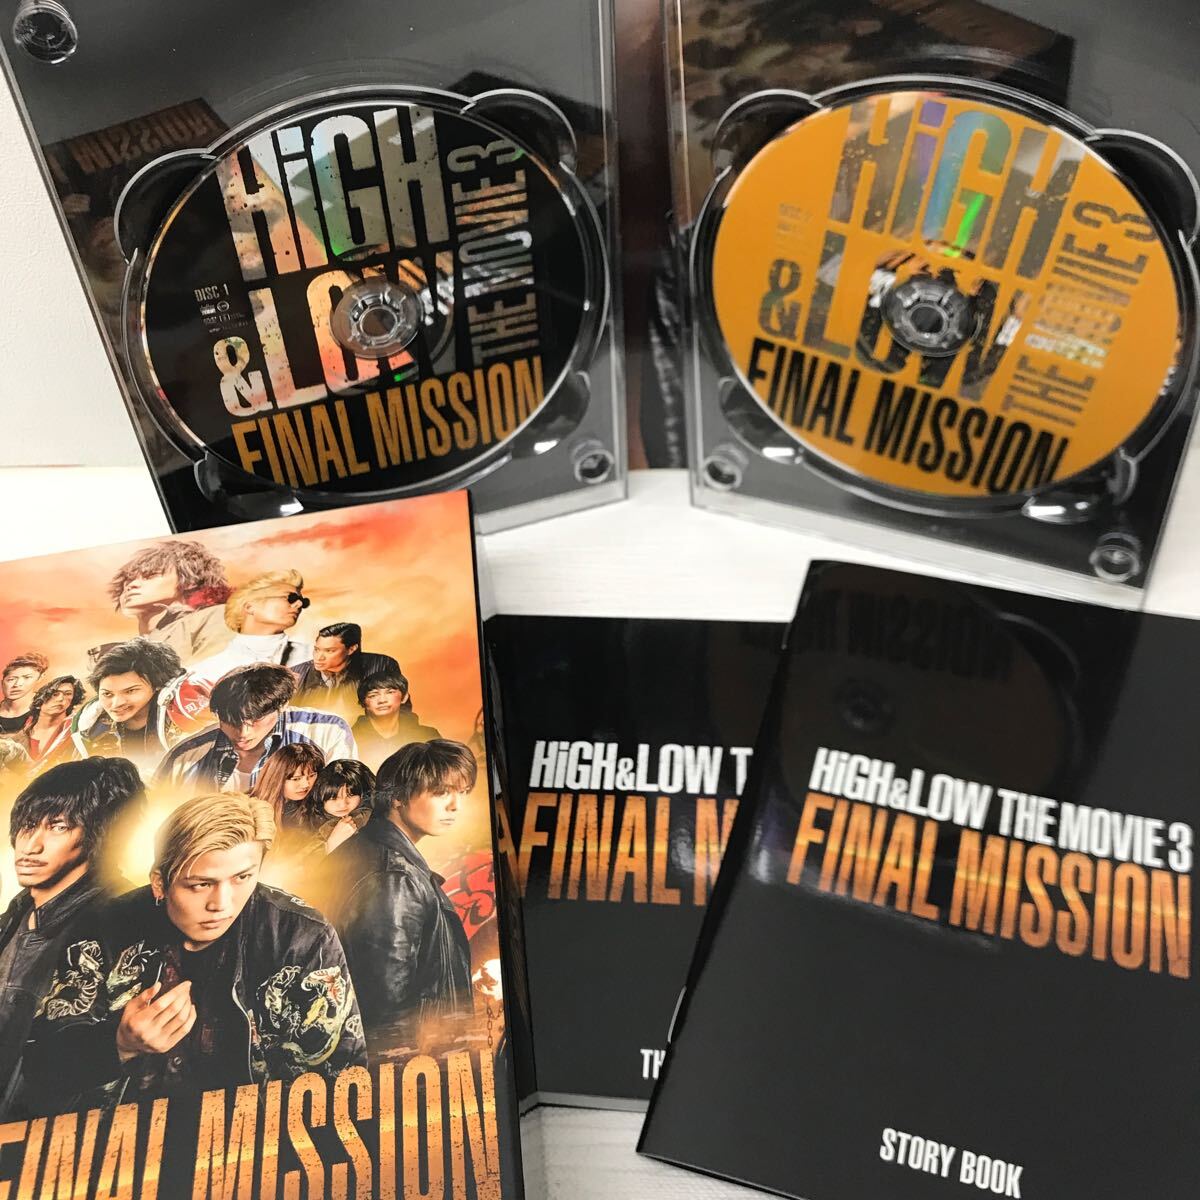 I0422A3 HiGH&LOW DVD 2枚組 3巻セット セル版 / THE MIGHTY WARRIORS / THE LIVE / FINAL MISSION rhythm zone 映画 音楽の画像7